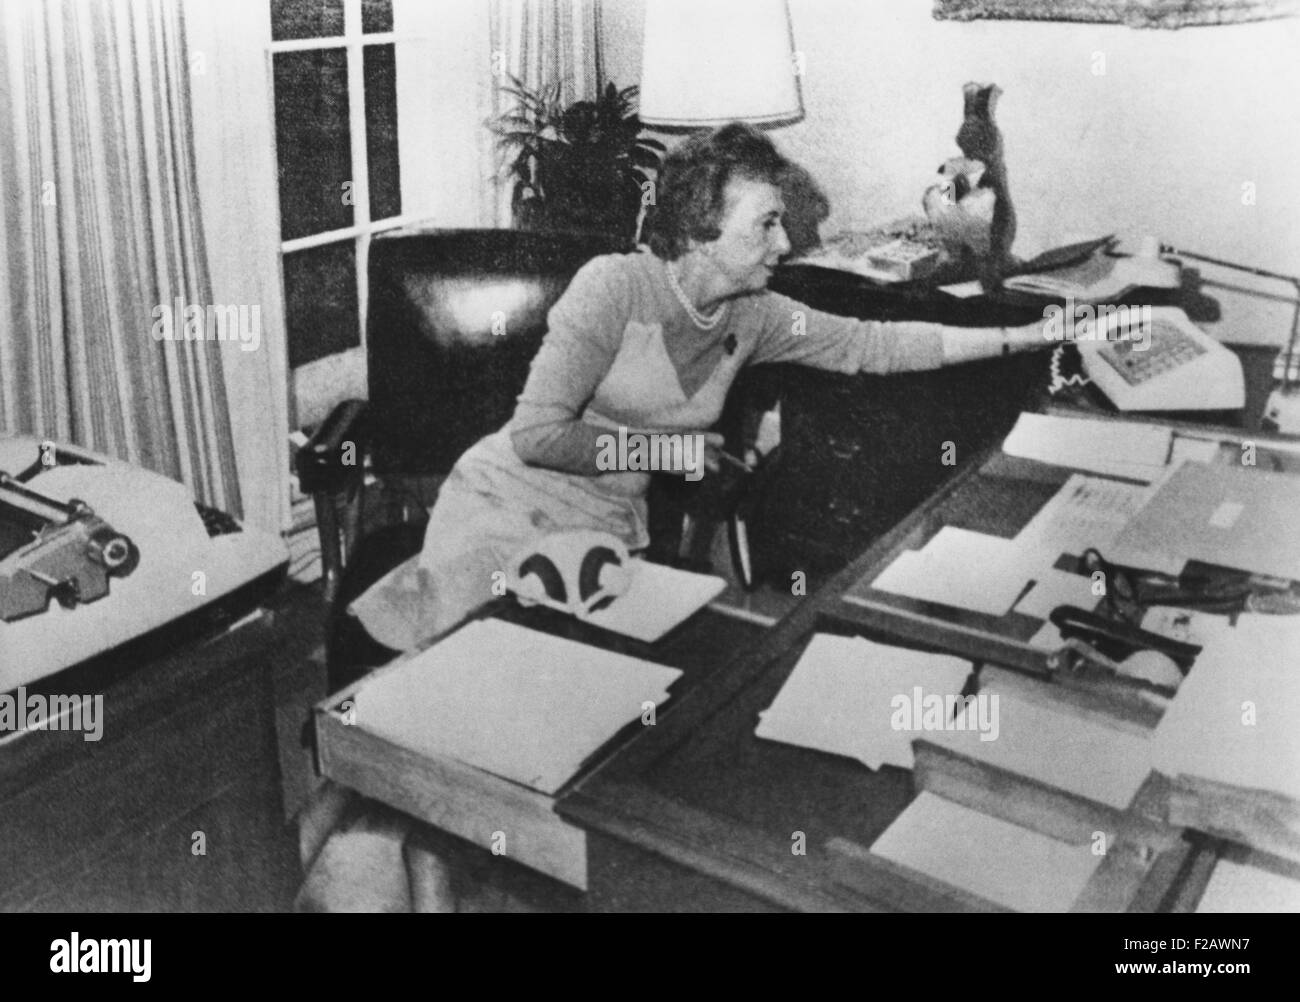 Rosemary Woods, President Nixon's personal secretary, demonstrating the 'Rose Mary Stretch'. She showed photographers how she may have caused the 18 1/2-minute gap in a crucial June 20, 1972 Watergate tape. Ca. Jan. 1974. (CSU 2015 11 1286) Stock Photo